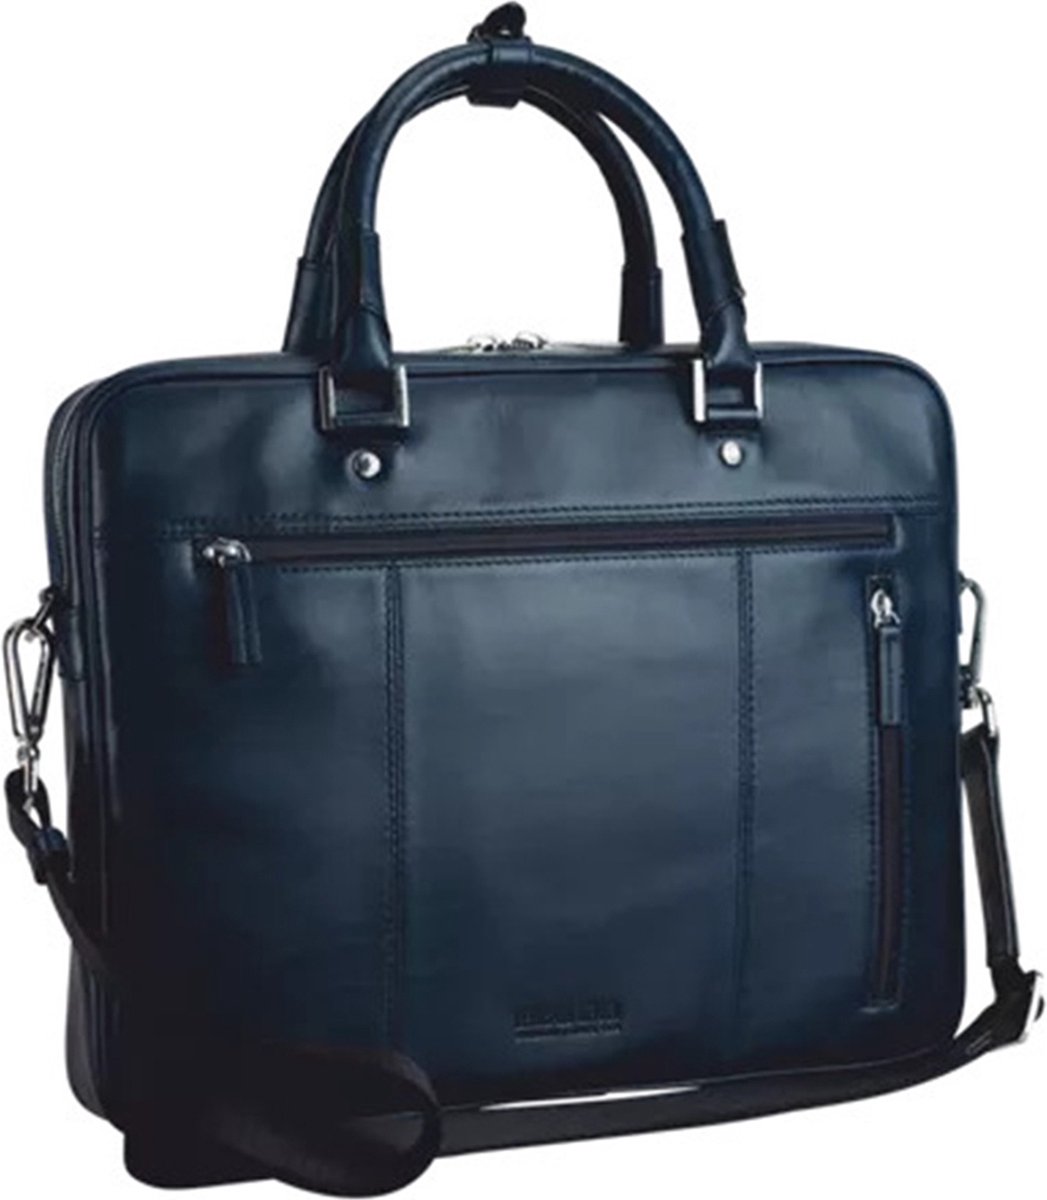 Leonhard Heyden Montreal Zipped Briefcase 1 Compartment navy blue